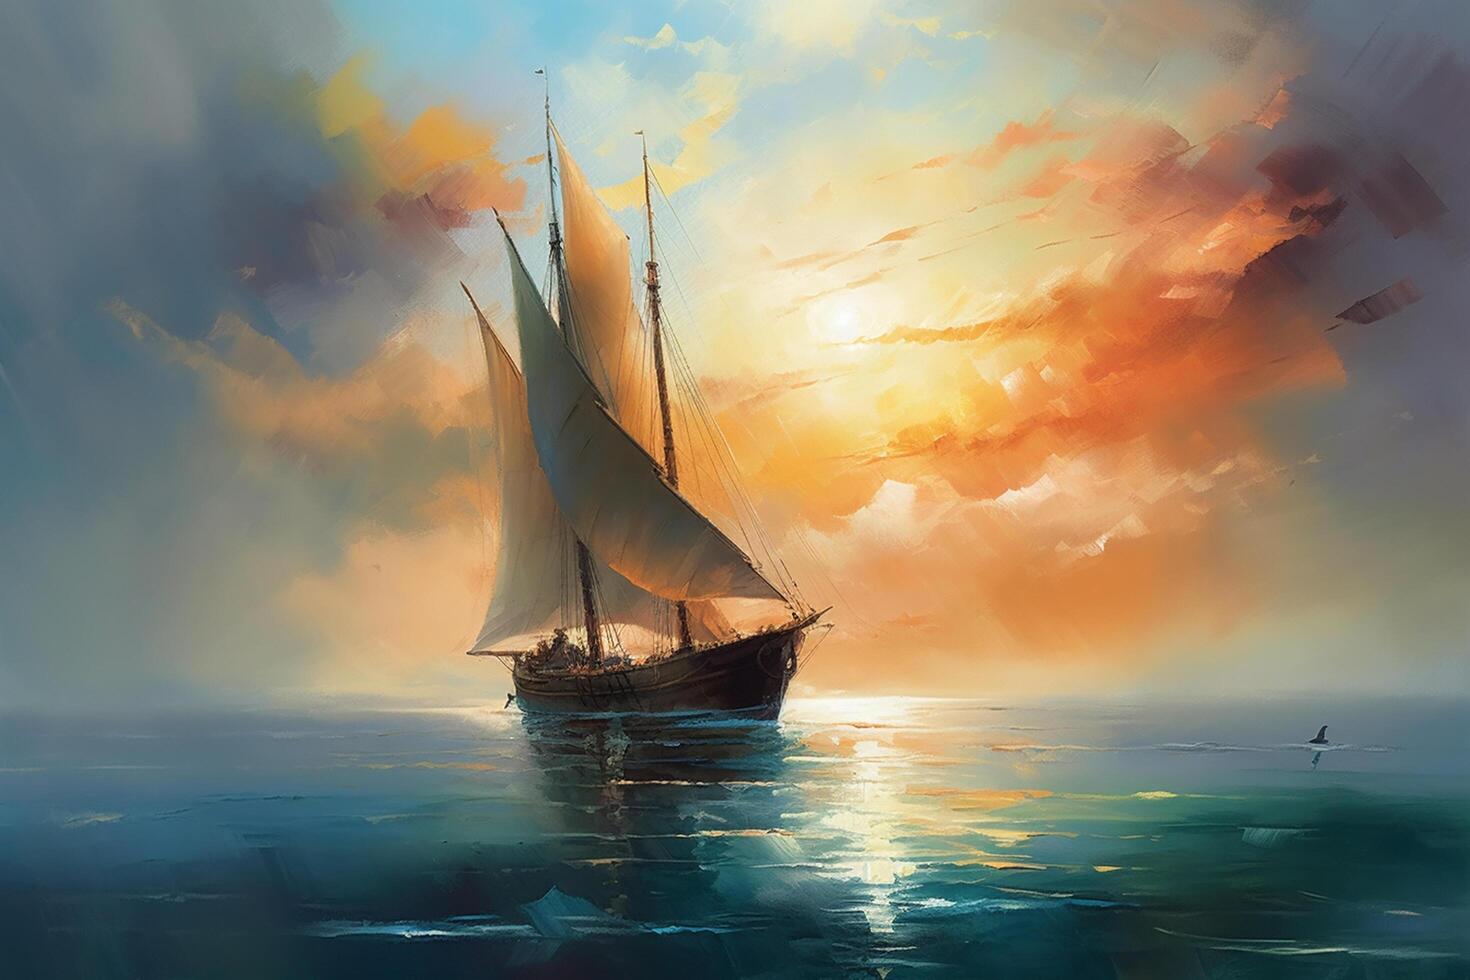 Sailing into Dawn's Embrace An Abstract Painting of a Sailboat on the Sea at Sunrise, Bathed in the Warmth of the Sun, Surrounded by Serene Clouds photo